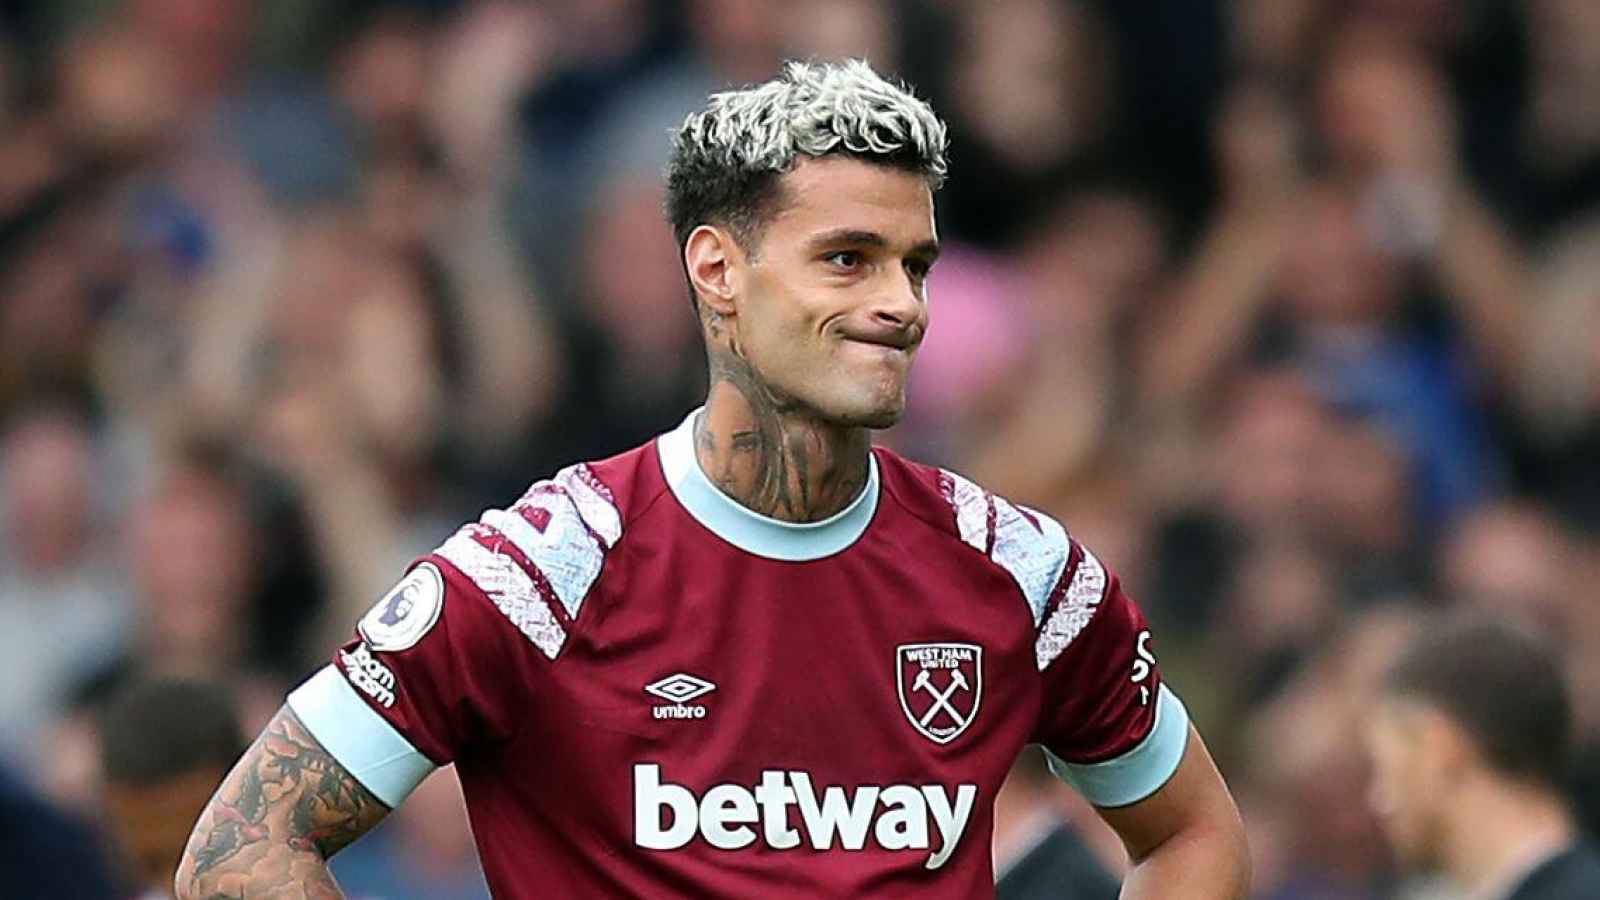 Player West Ham sold last summer is now worth €60m